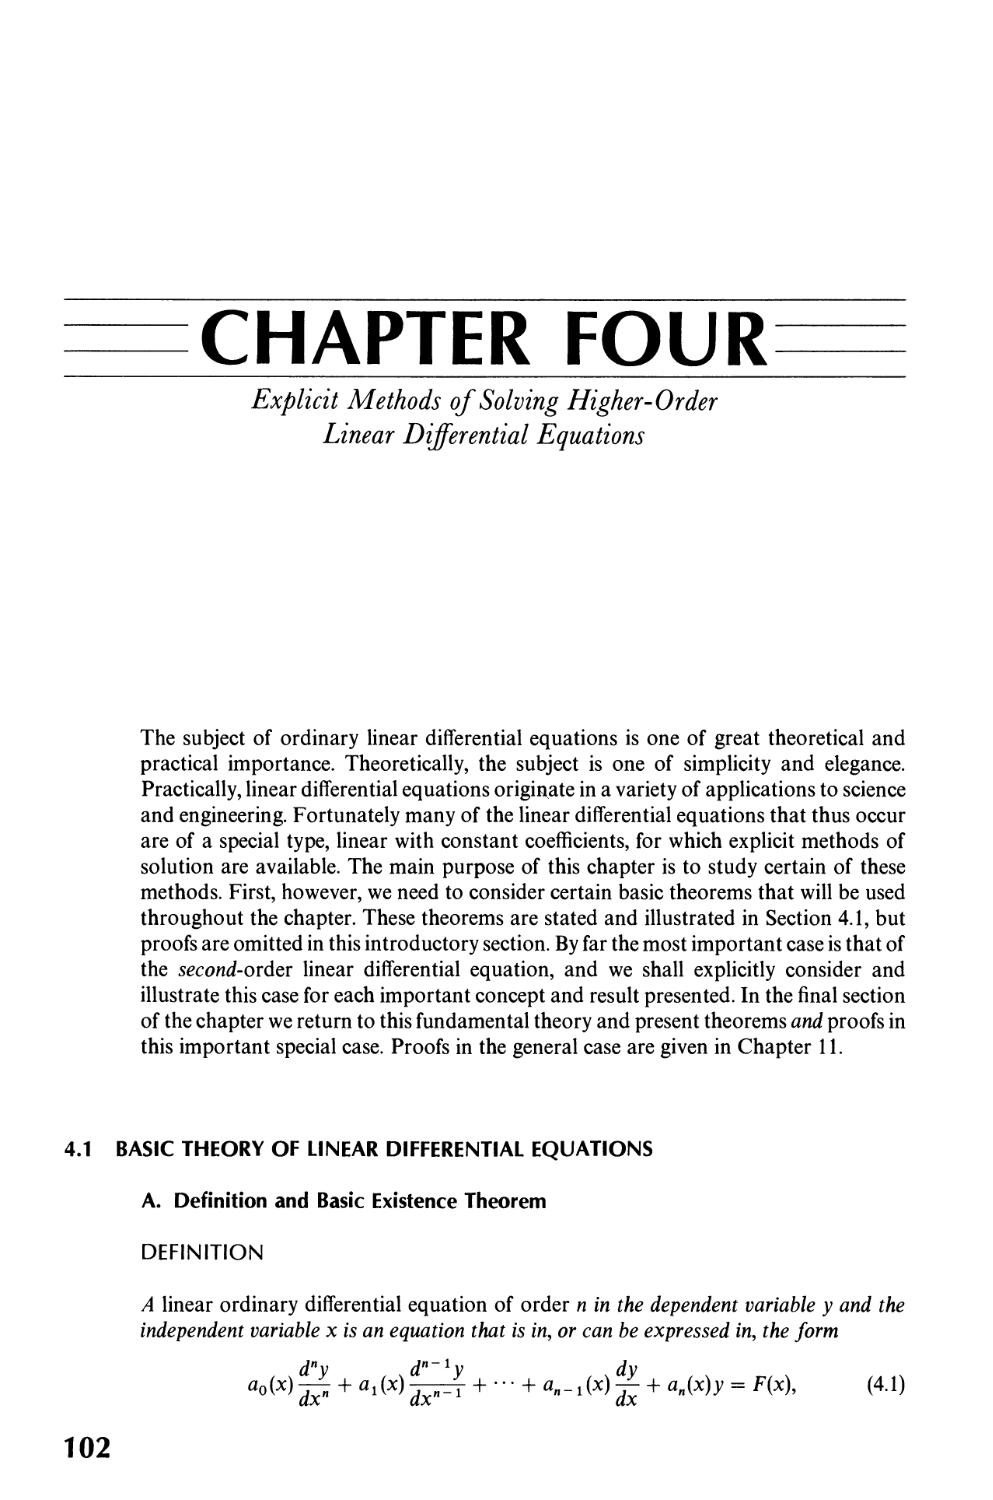 4  Explicit Methods of Solving Higher-Order 
Linear Differential Equations